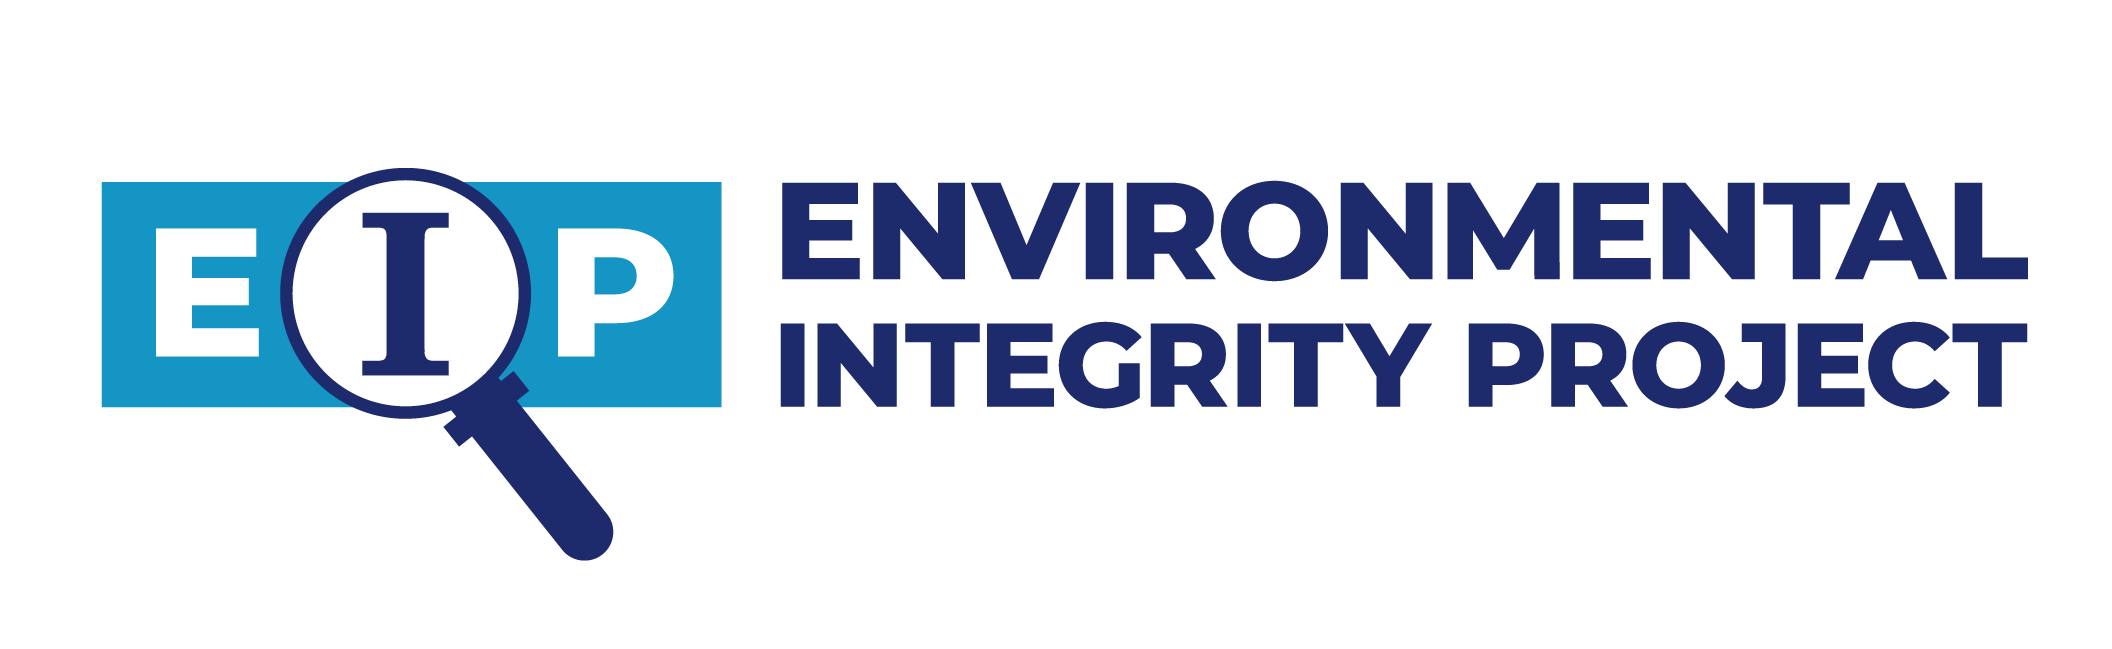 Environmental Integrity » EIP Brunner Island Press Conference 7.31.19